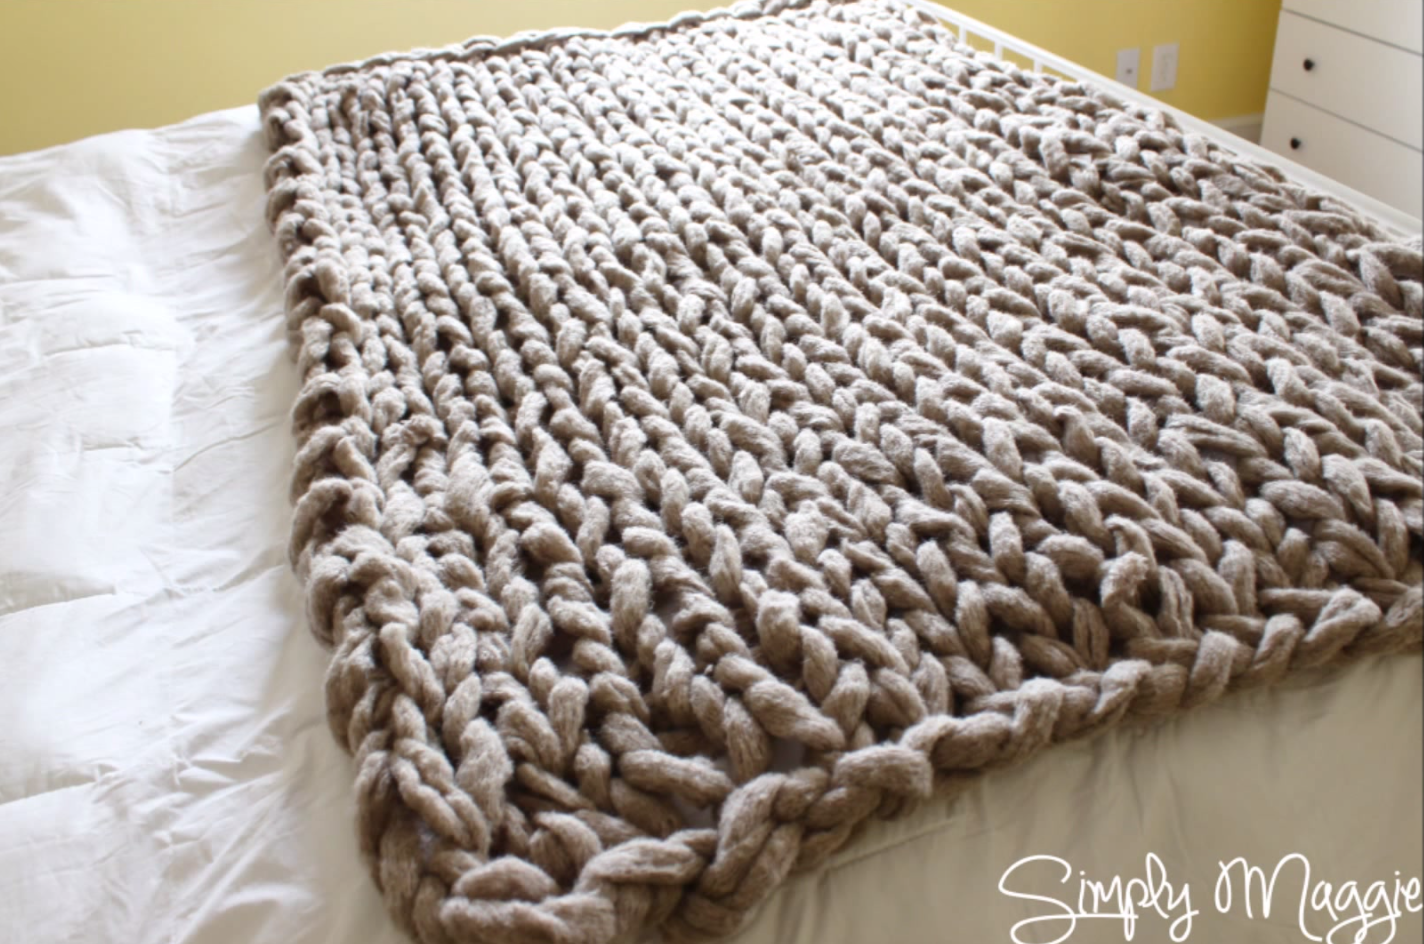 Arm knit a blanket in 45 minutes!